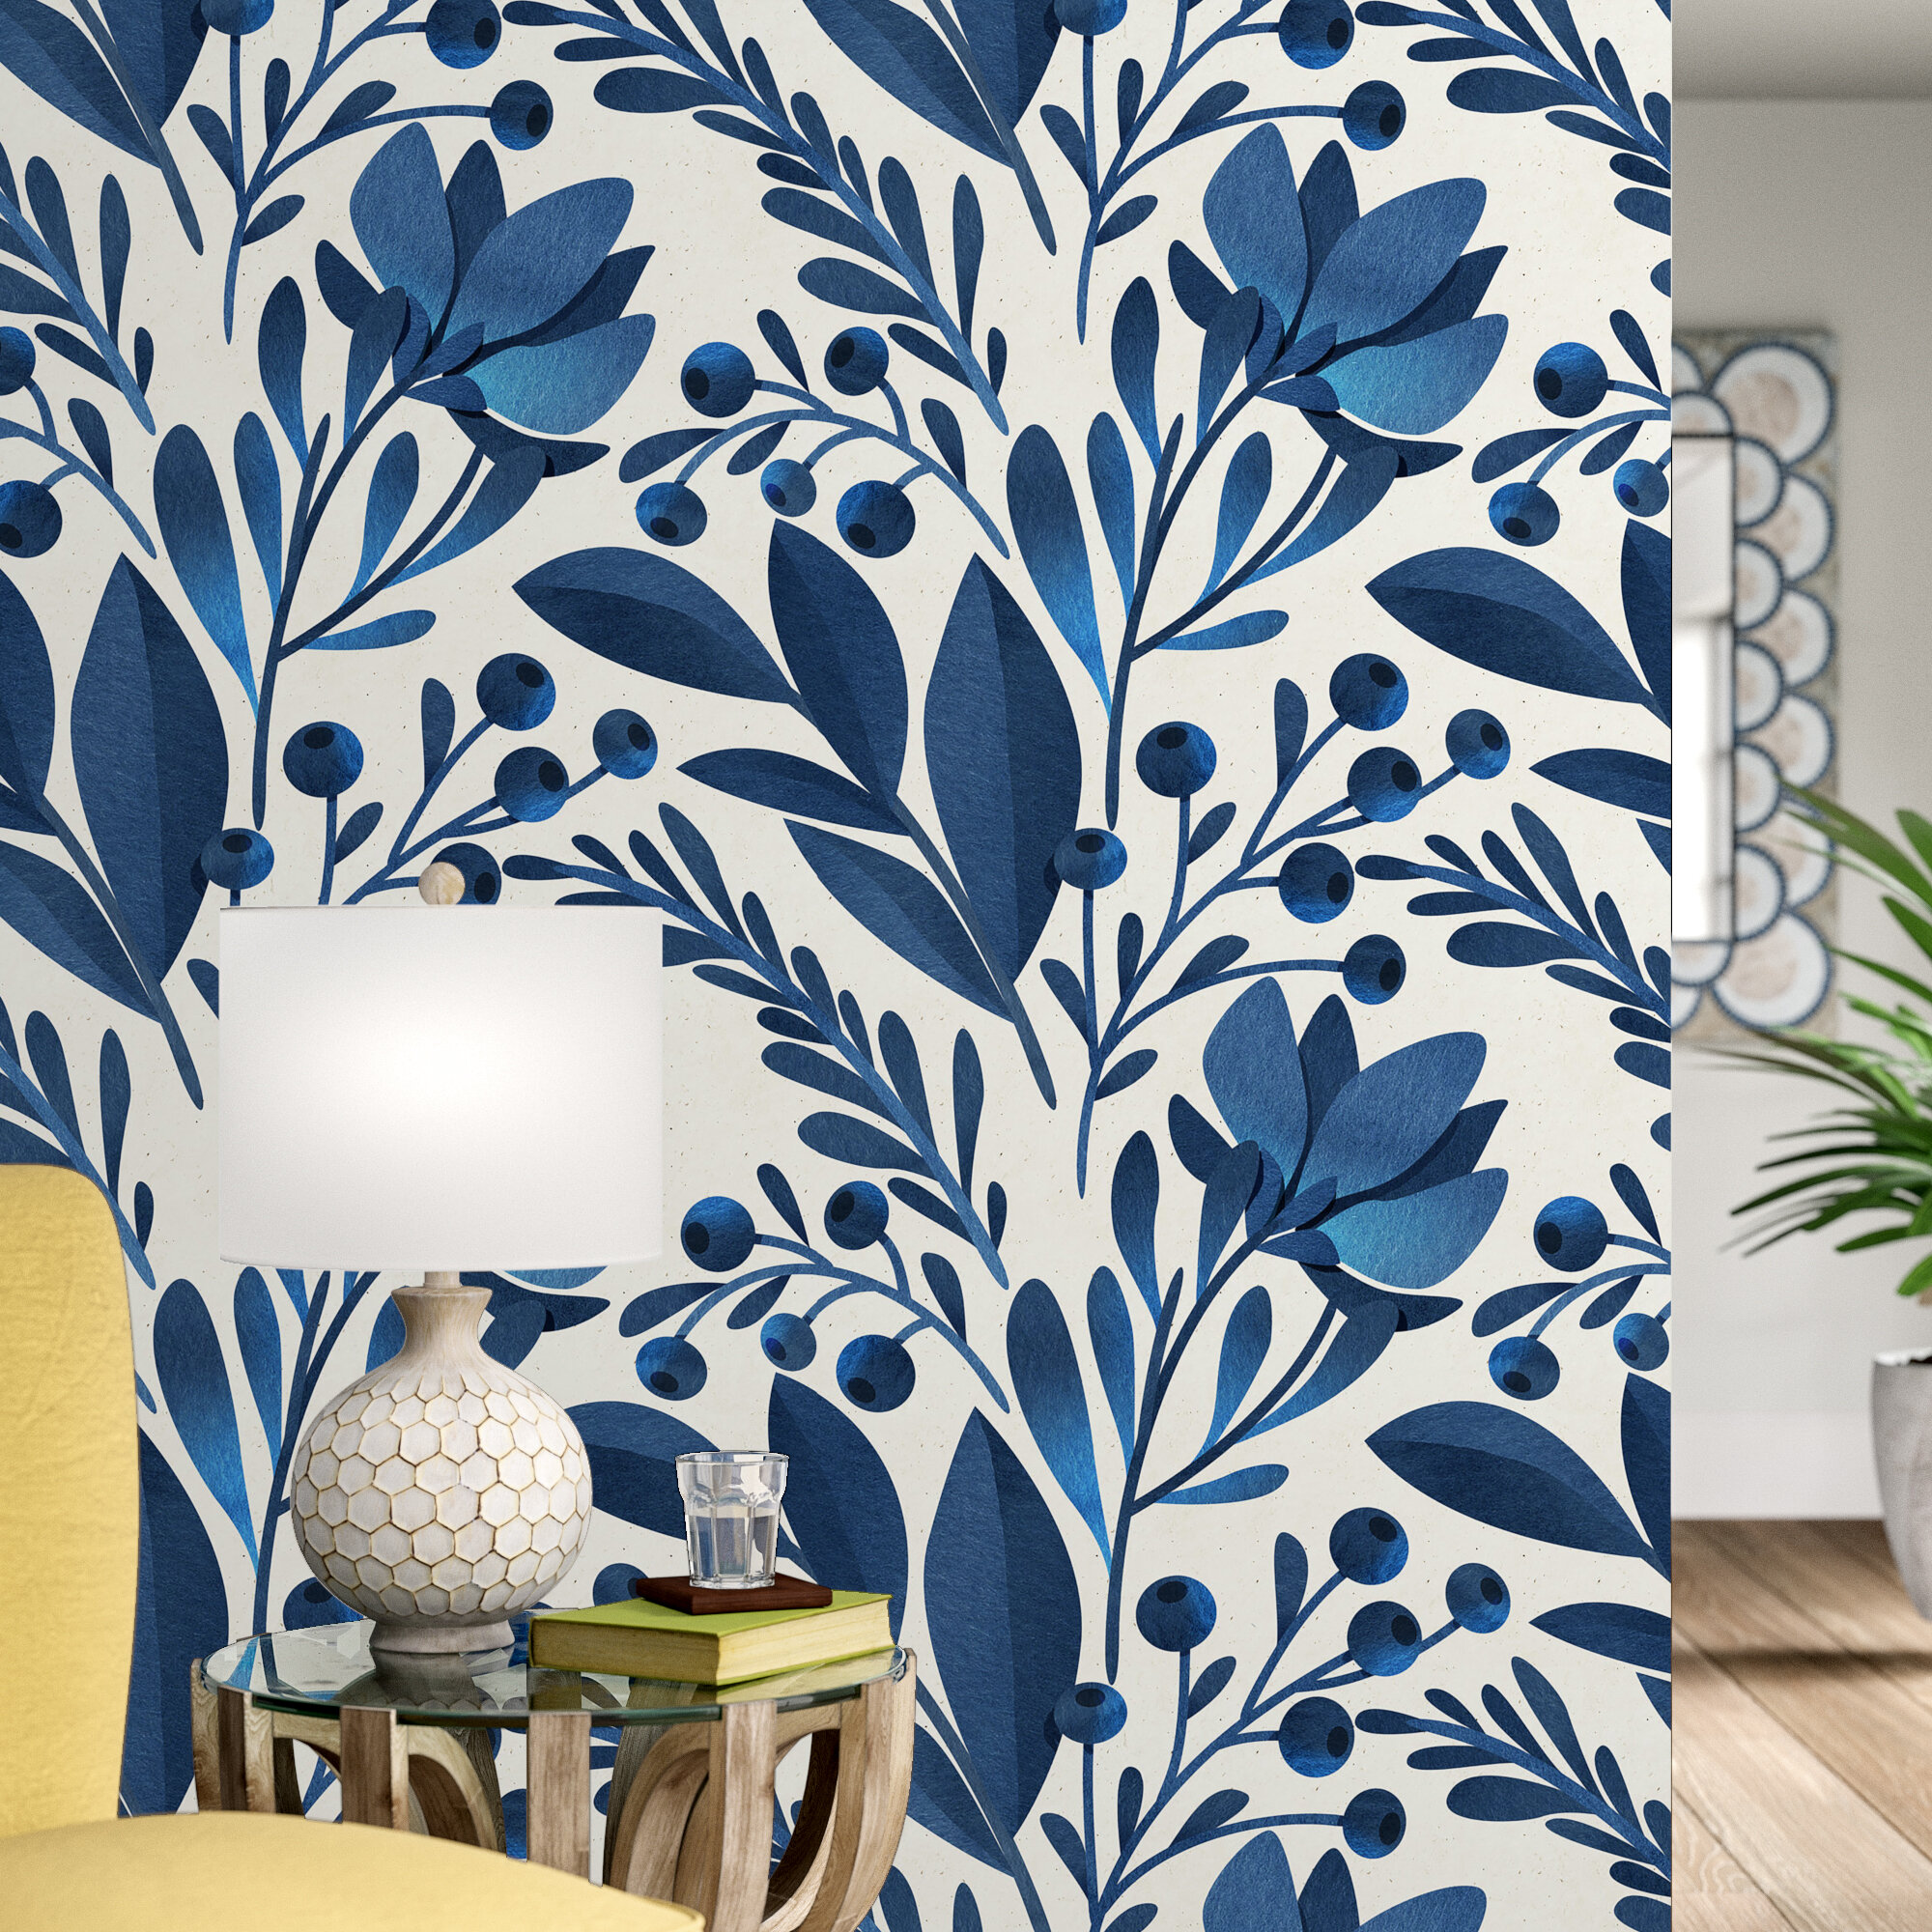 Floral Botanical Self Adhesive Wallpaper You Ll Love In 2020